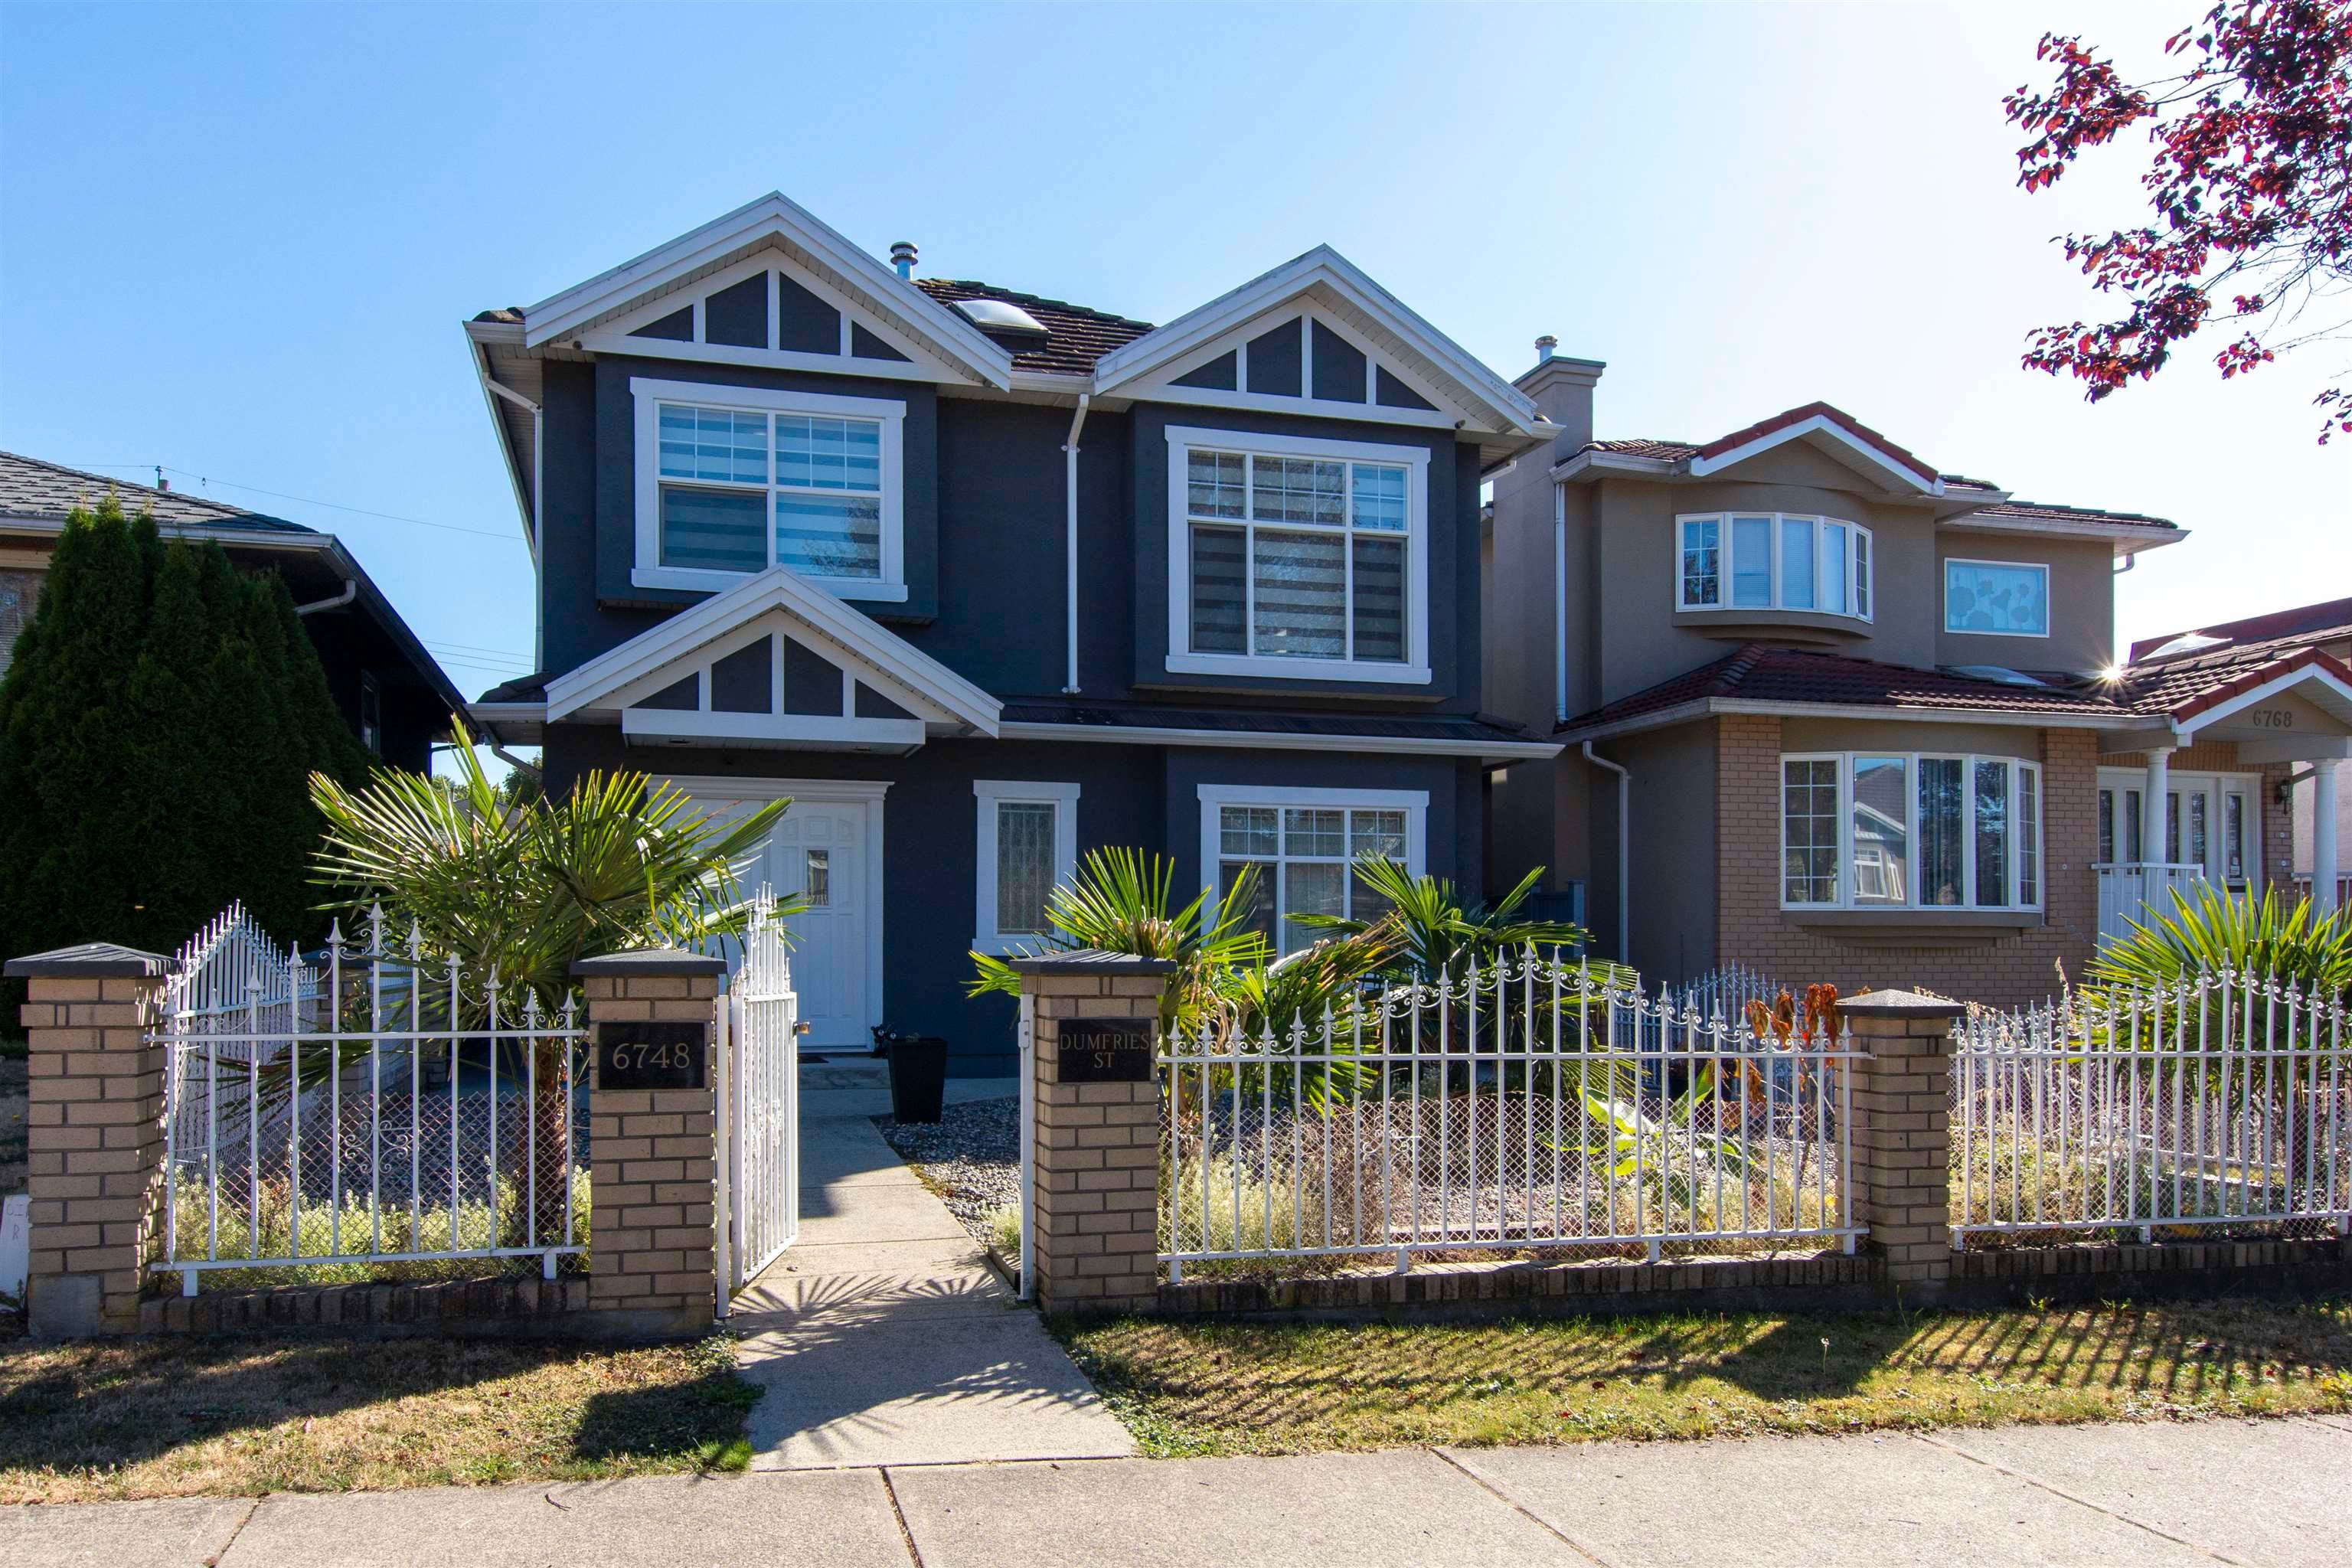 I have sold a property at 6748 DUMFRIES ST in Vancouver
